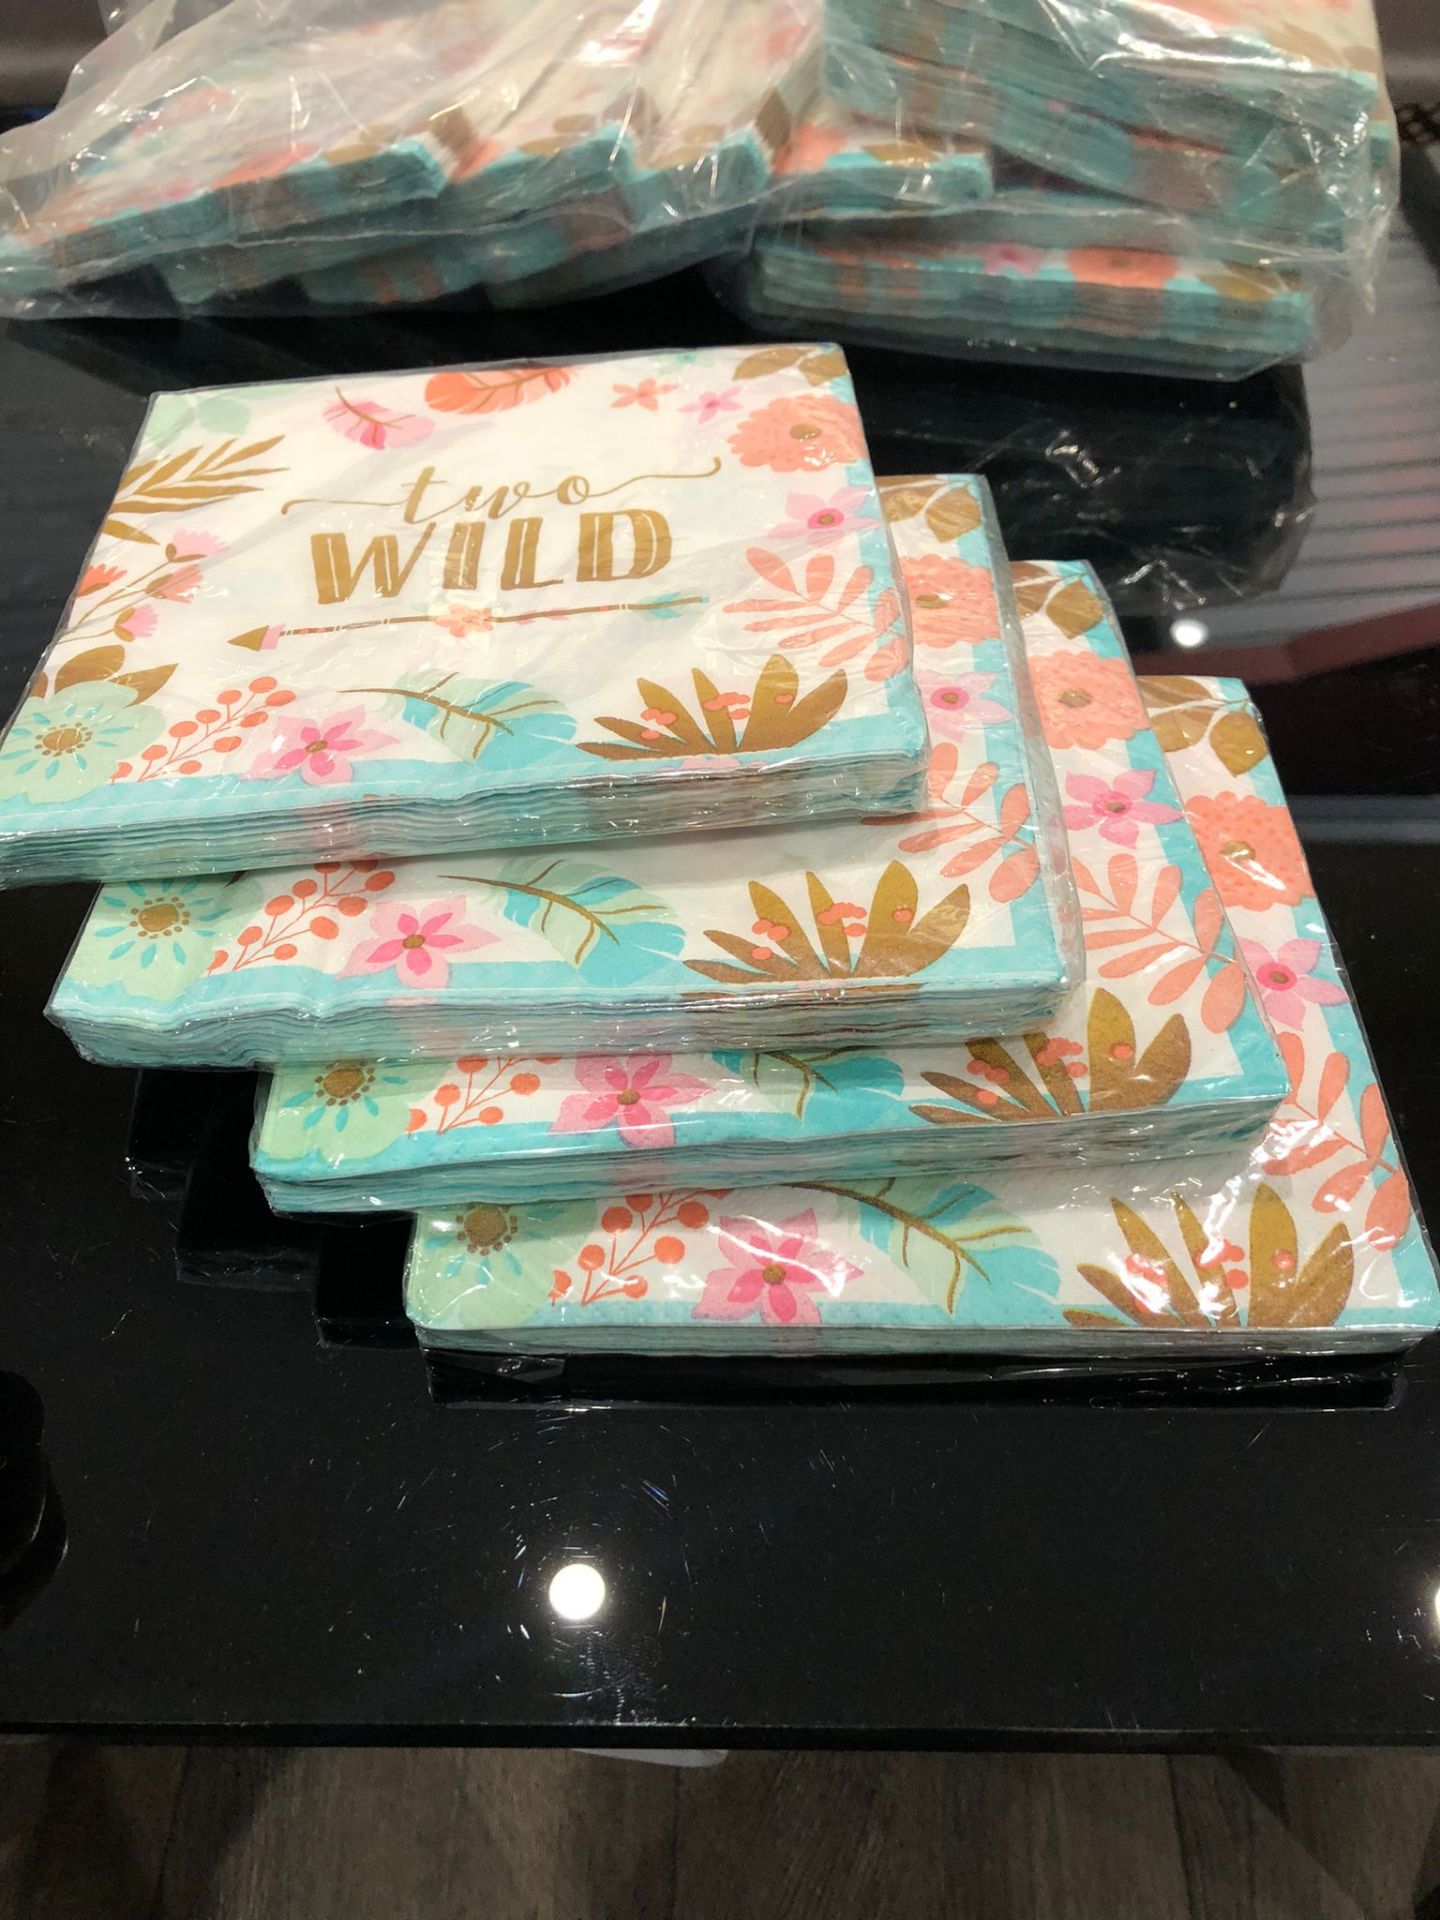 600 PACKS OF TWO & THREE WILD NAPKINS 33CM (16 ISSUES PER PACK) RRP£1.29 EACH